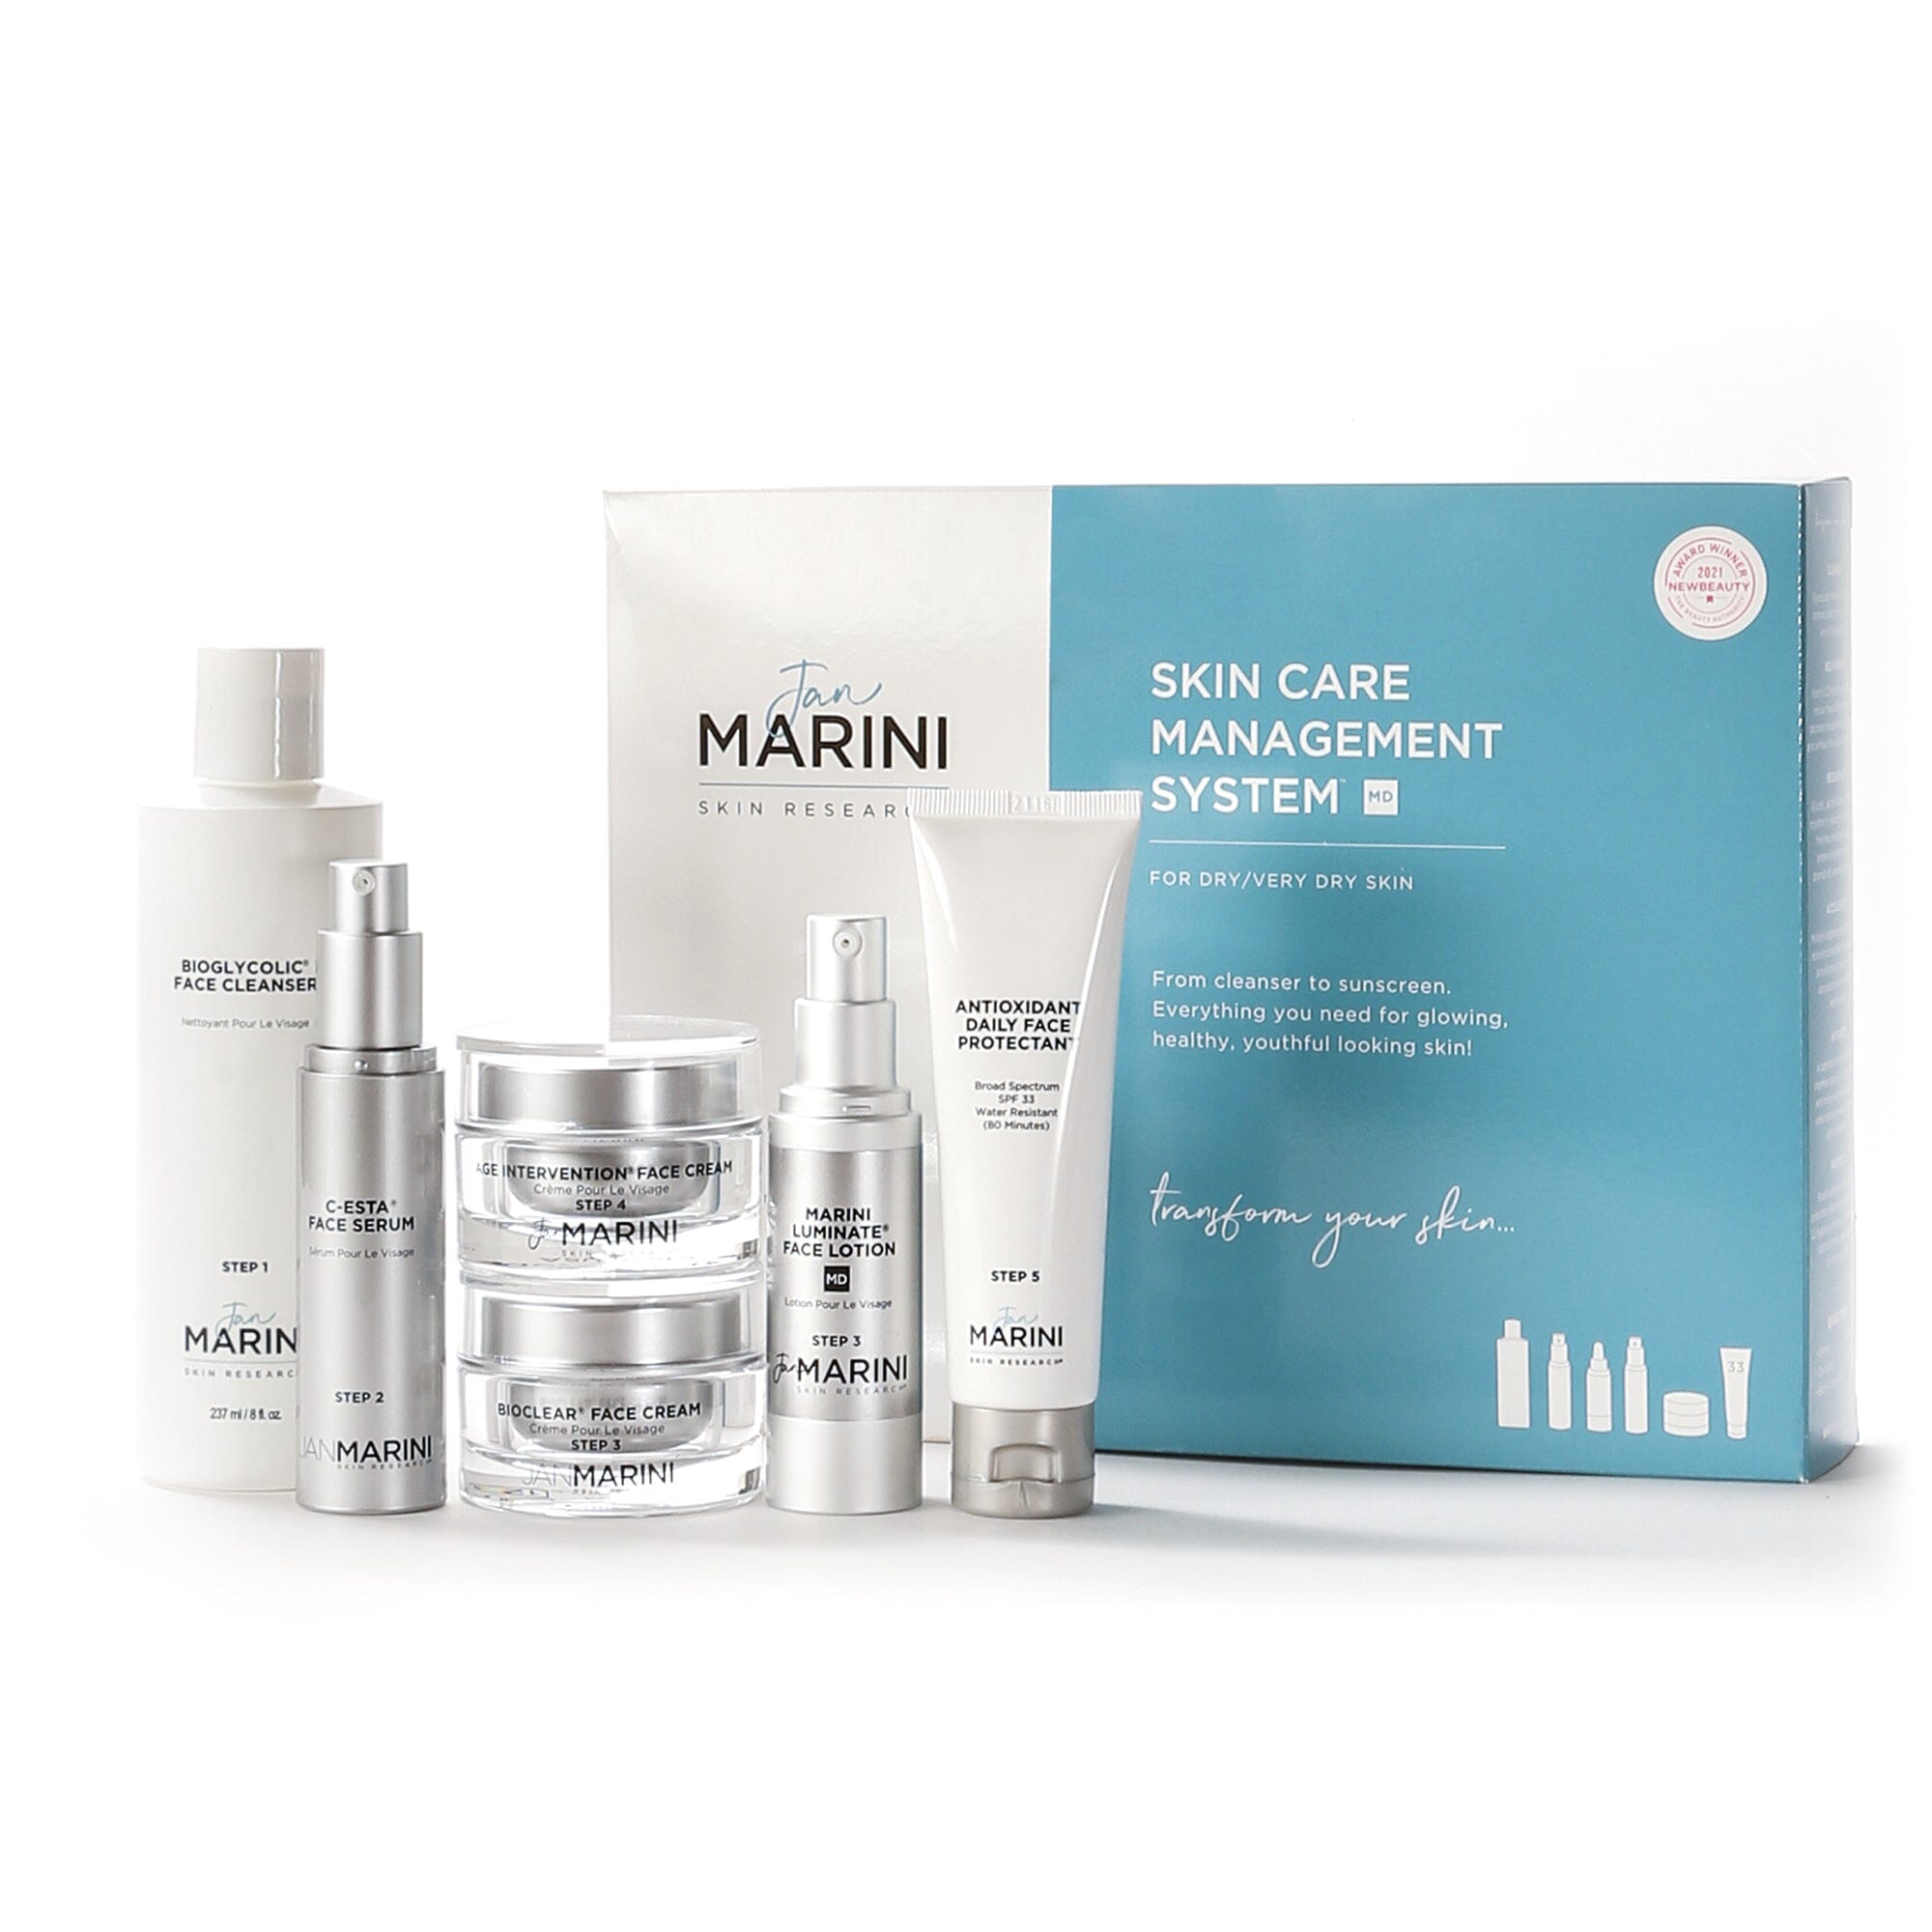 Jan Marini Skin Care Management System MD - Dry/Very Dry Skin with Antioxidant Daily Face Protectant SPF 33 Anti-Aging Skin Care Kits Jan Marini Shop at Exclusive Beauty Club